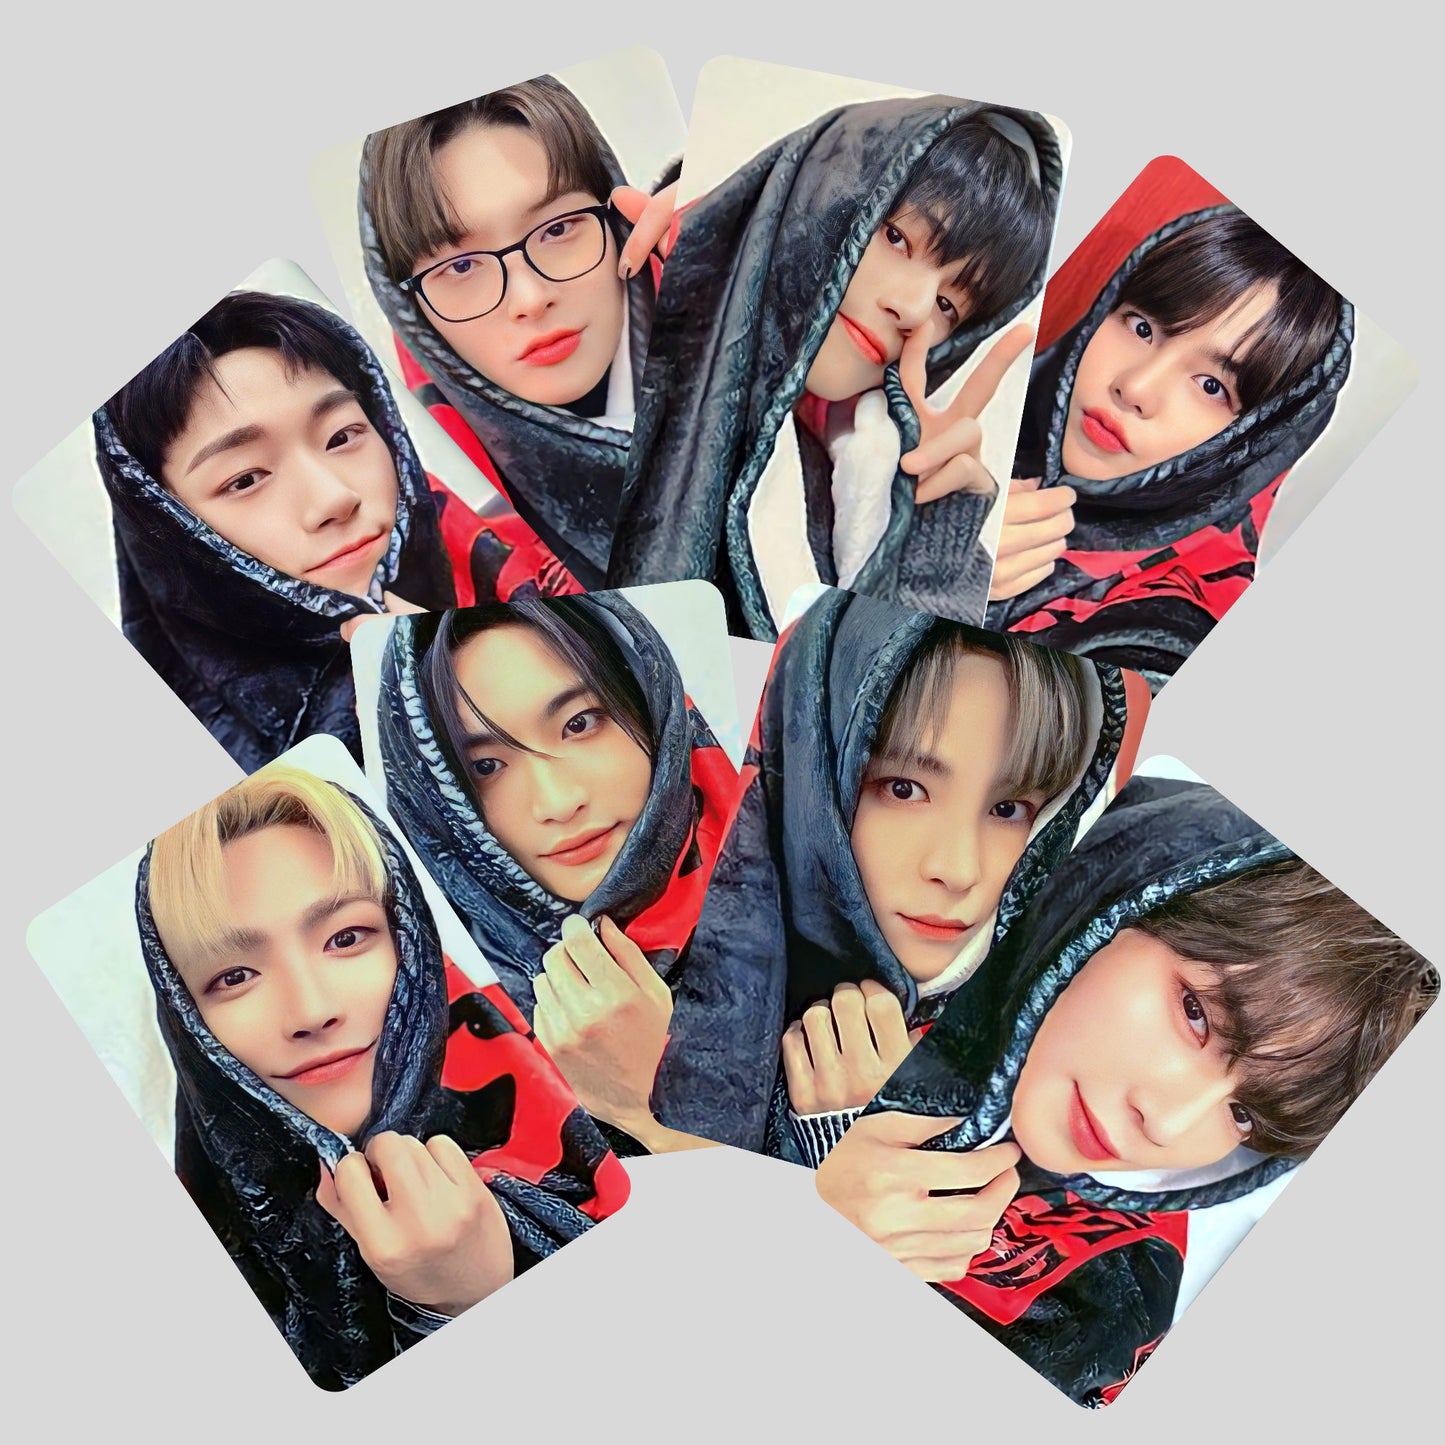 Ateez Ep Fin Will Broadcast Blanket Pc Set